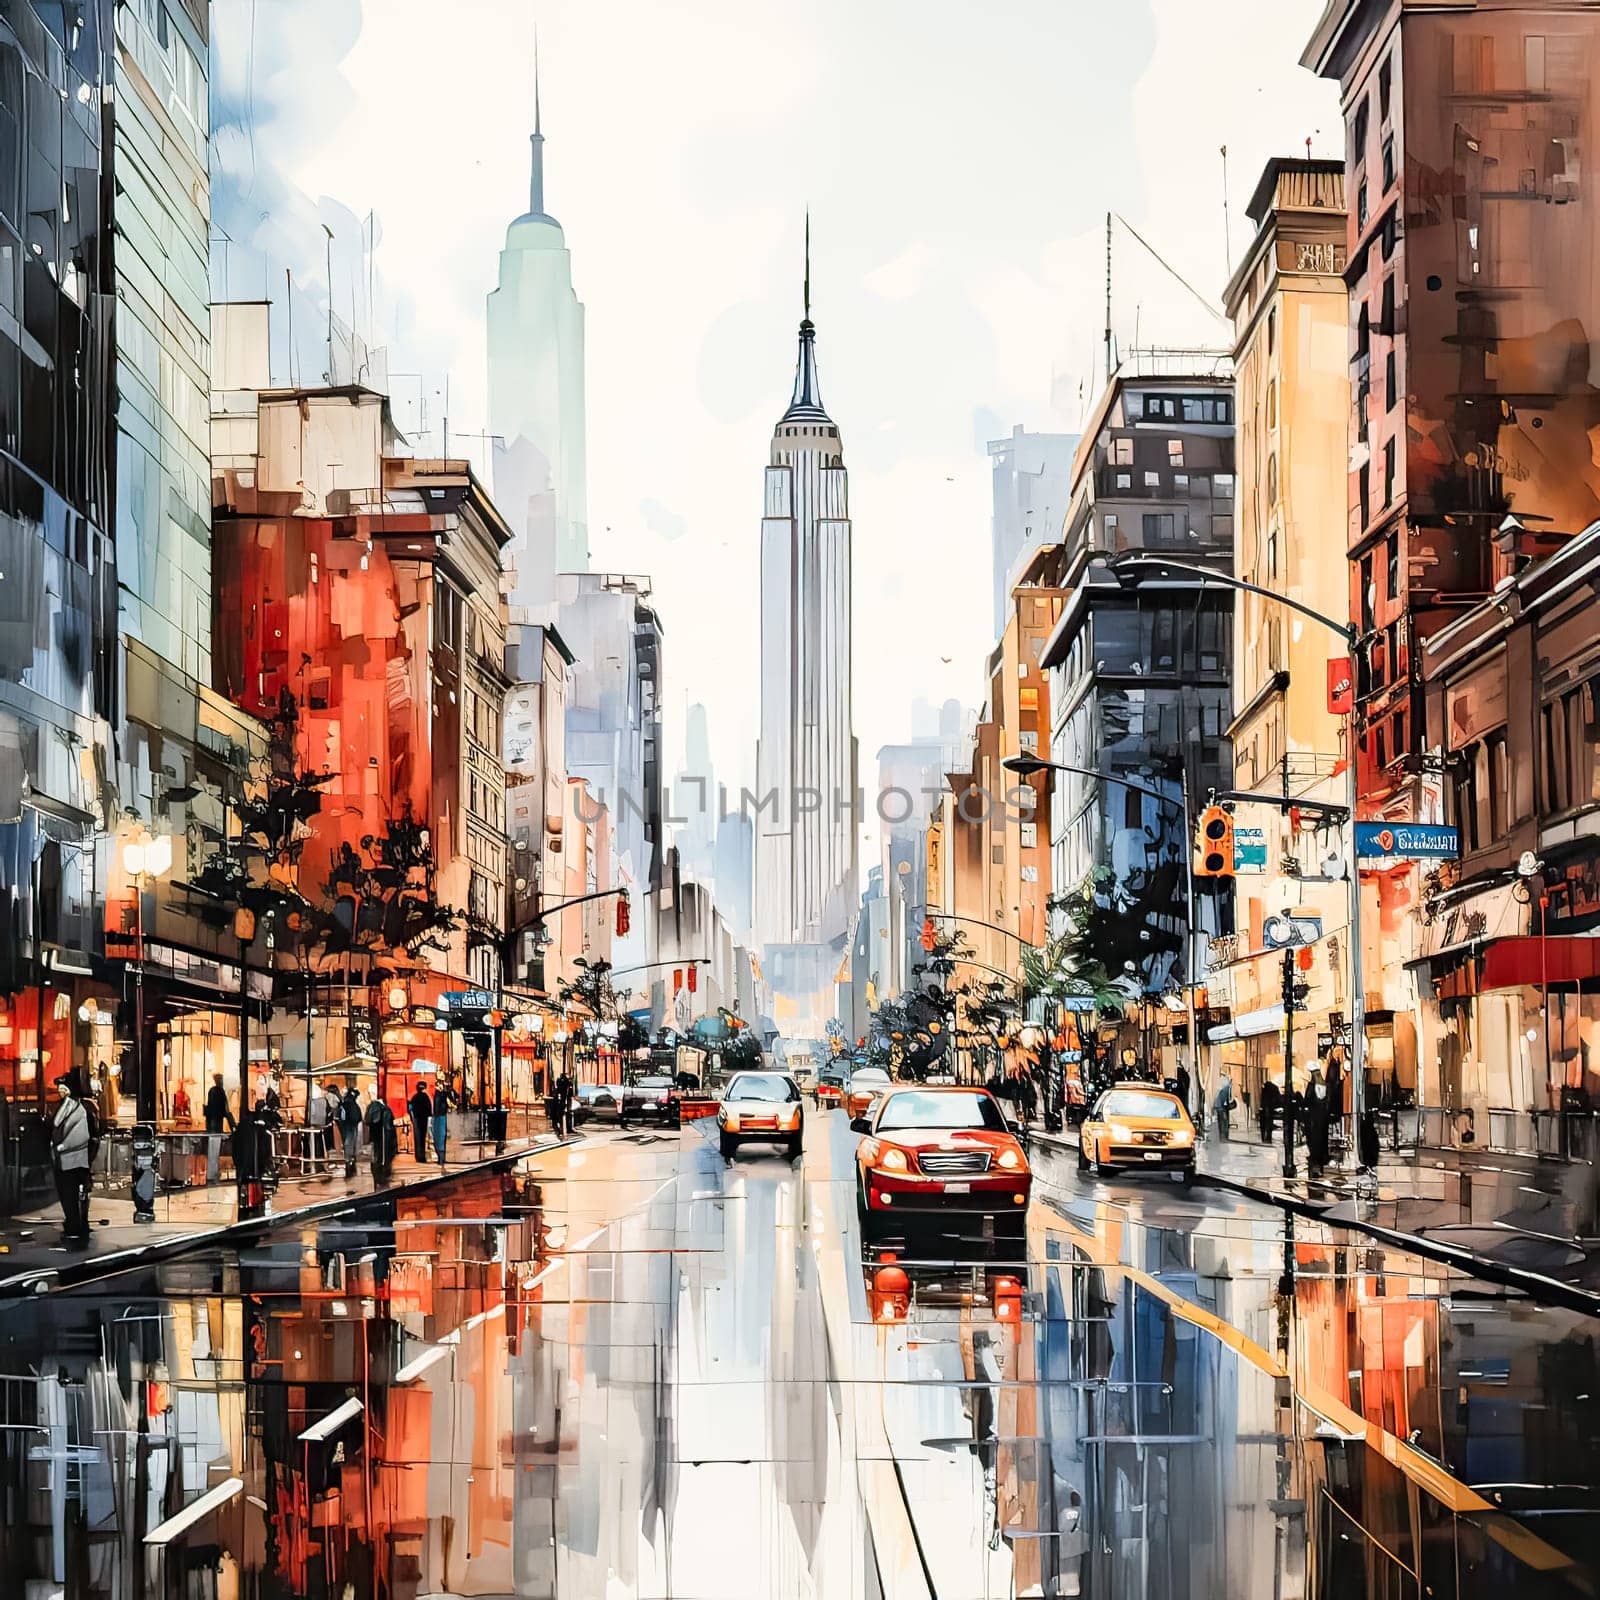 Urban Impression, Watercolor sketch captures the energy of New York streets and iconic skyscrapers